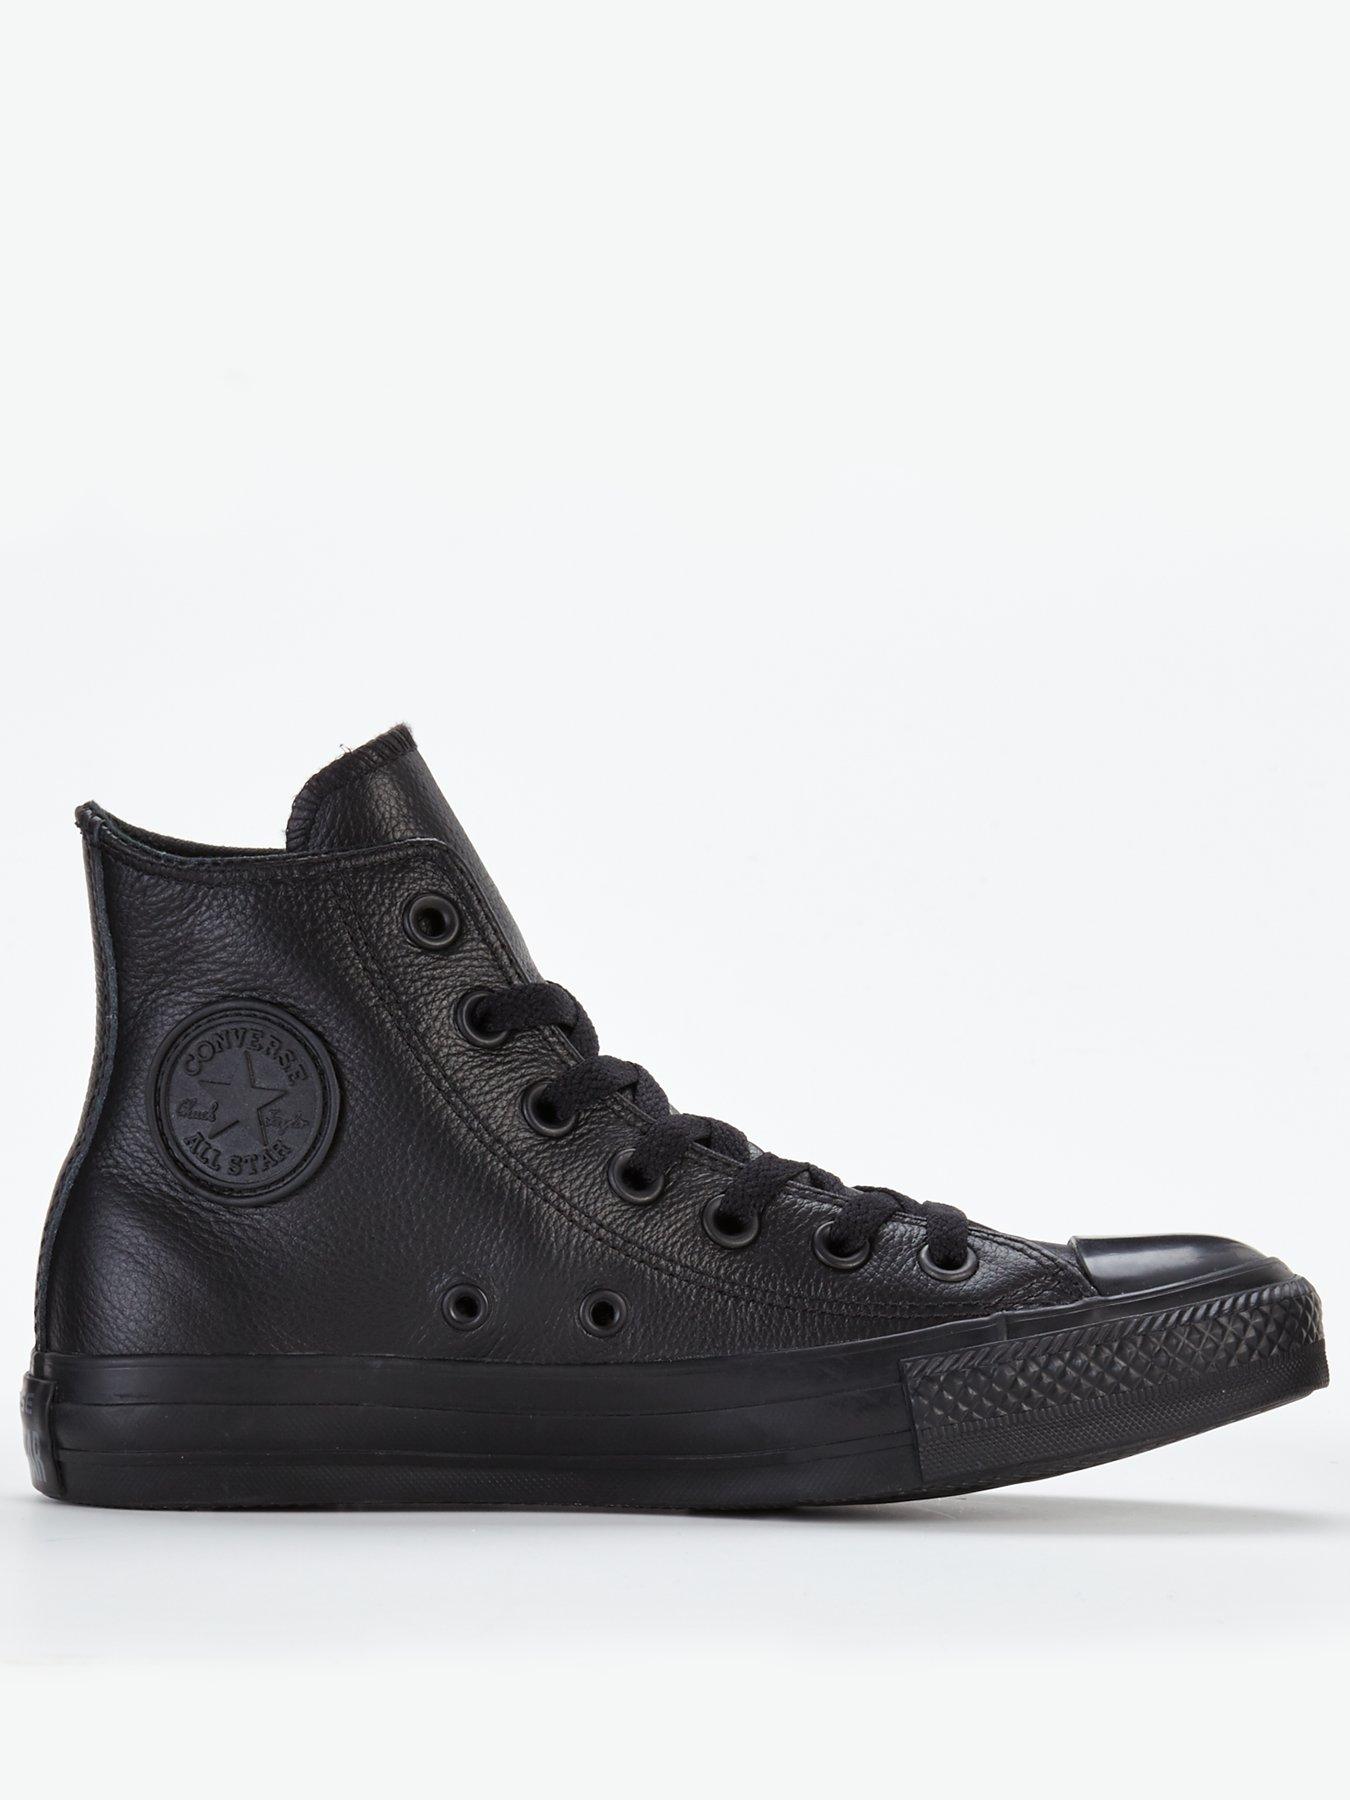 black leather converse high tops 